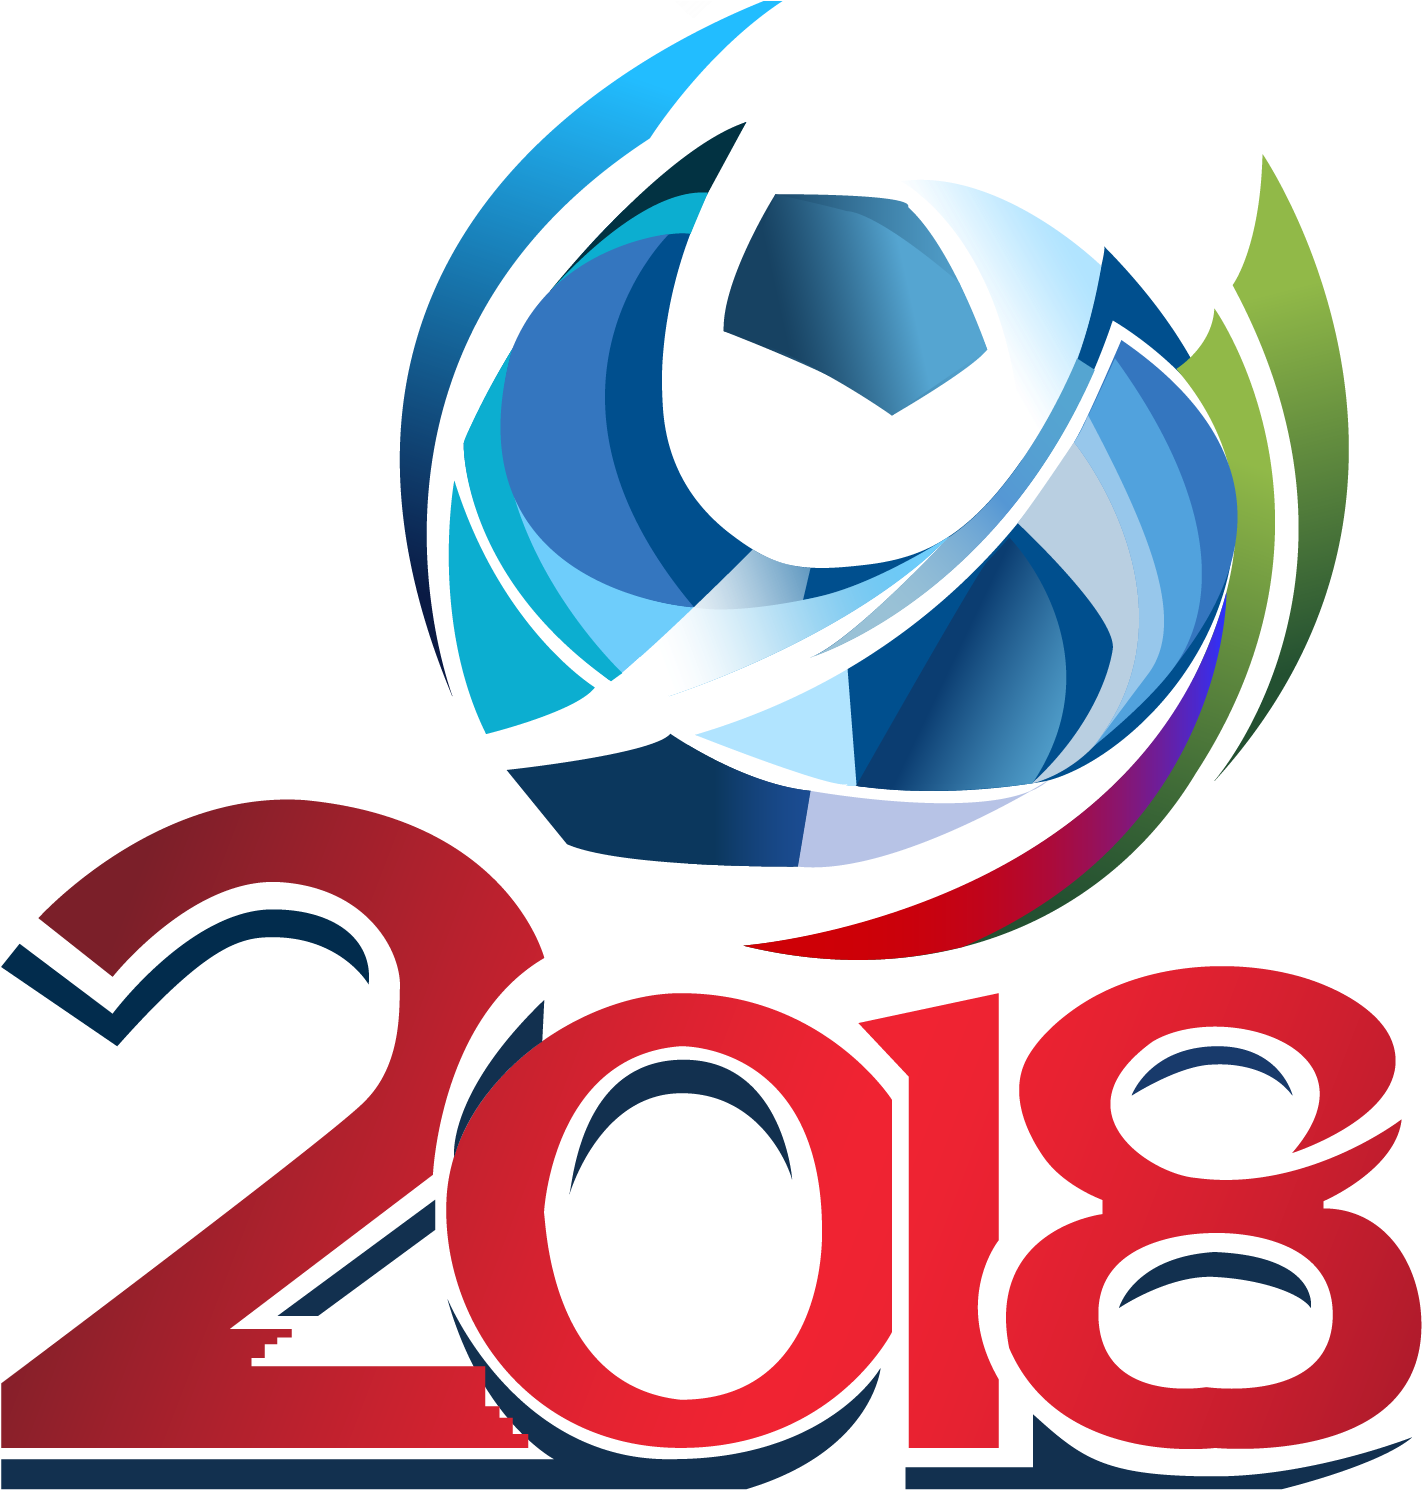 2018 Fifa World Cup Mordovia 2014 Fifa World Cup 2022 - 2018 Fifa World Cup (1500x1500)